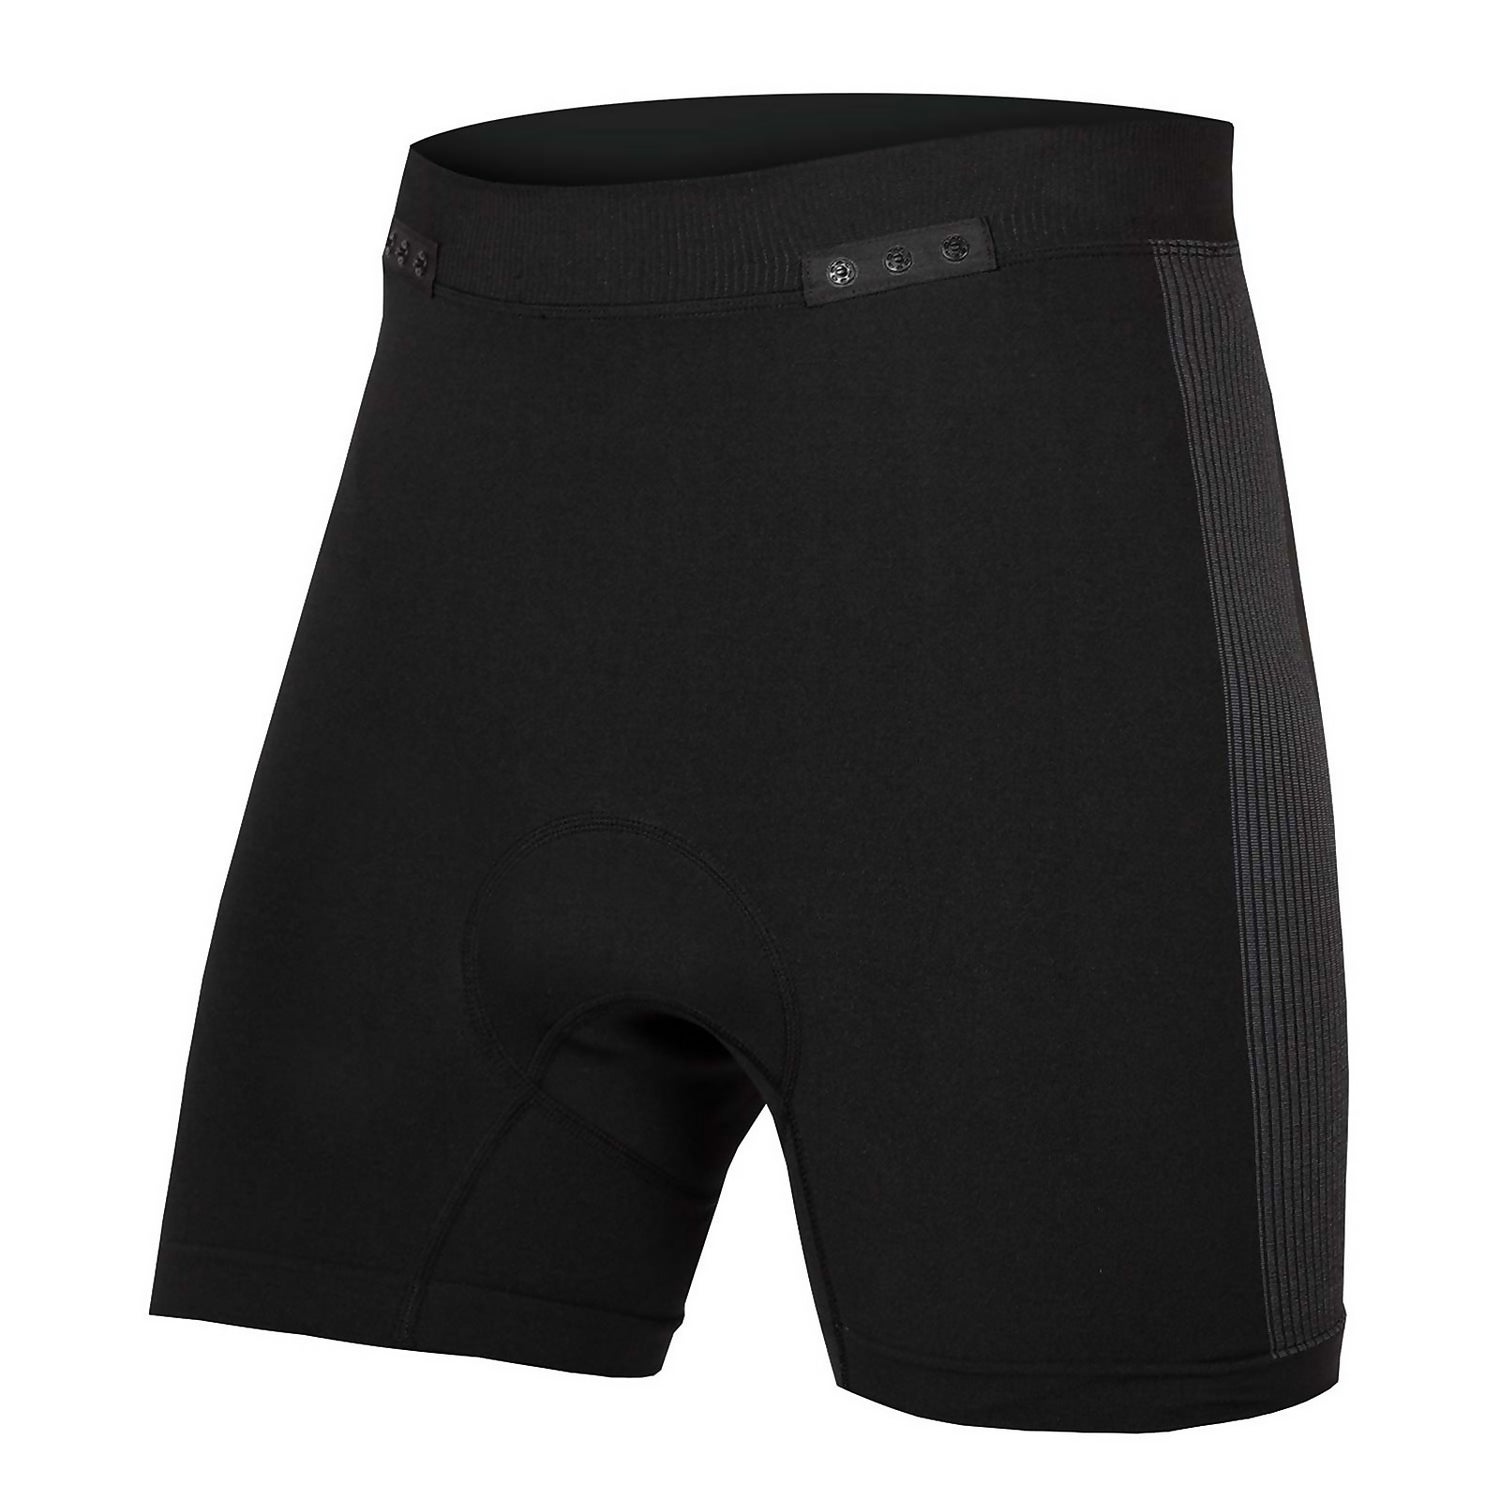 Men's Engineered Padded Boxer with Clickfast - Black - XXL